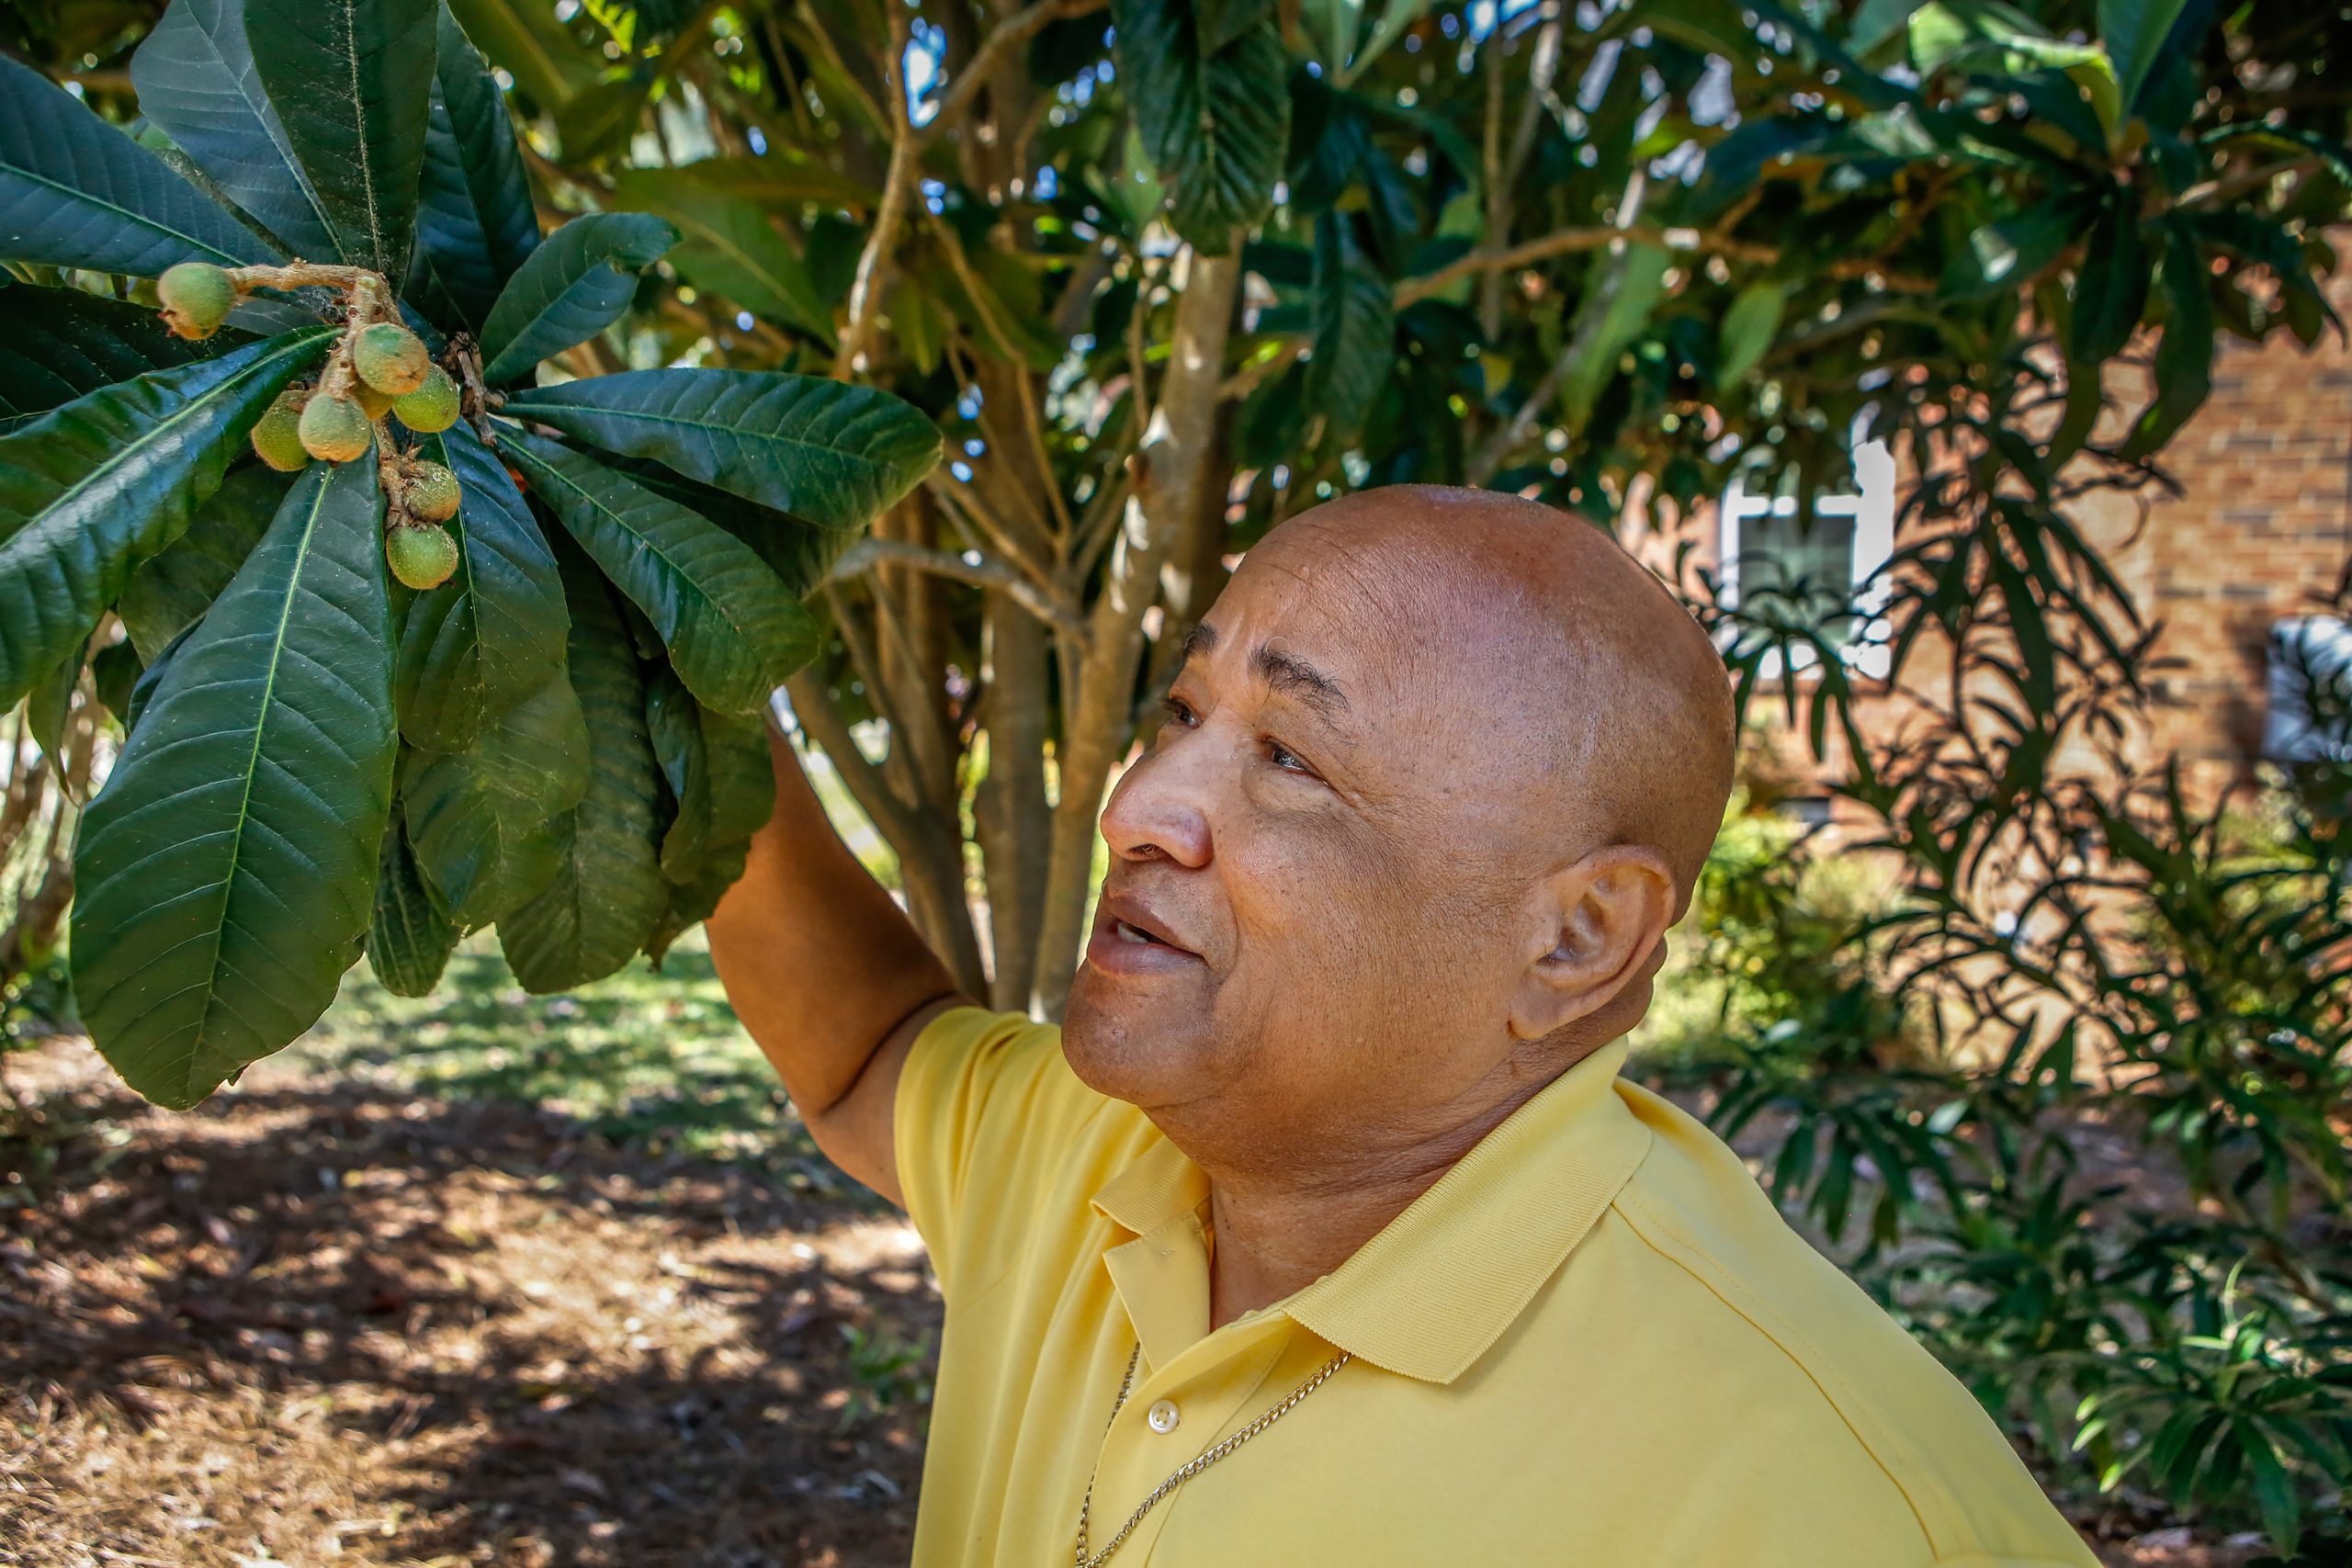 A prolific gardener, Byron credits his grandfather with instilling in him a love of plants and introducing him to the loquat tree. Above: Byron and his wife, Connie, work together as a team in real estate, and clients who show an interest in plants may receive a loquat tree, grown from cuttings and offshoots, transplanted from their garden. Byron guesses that 50 to 60 loquat trees around Columbia came from his seedlings.